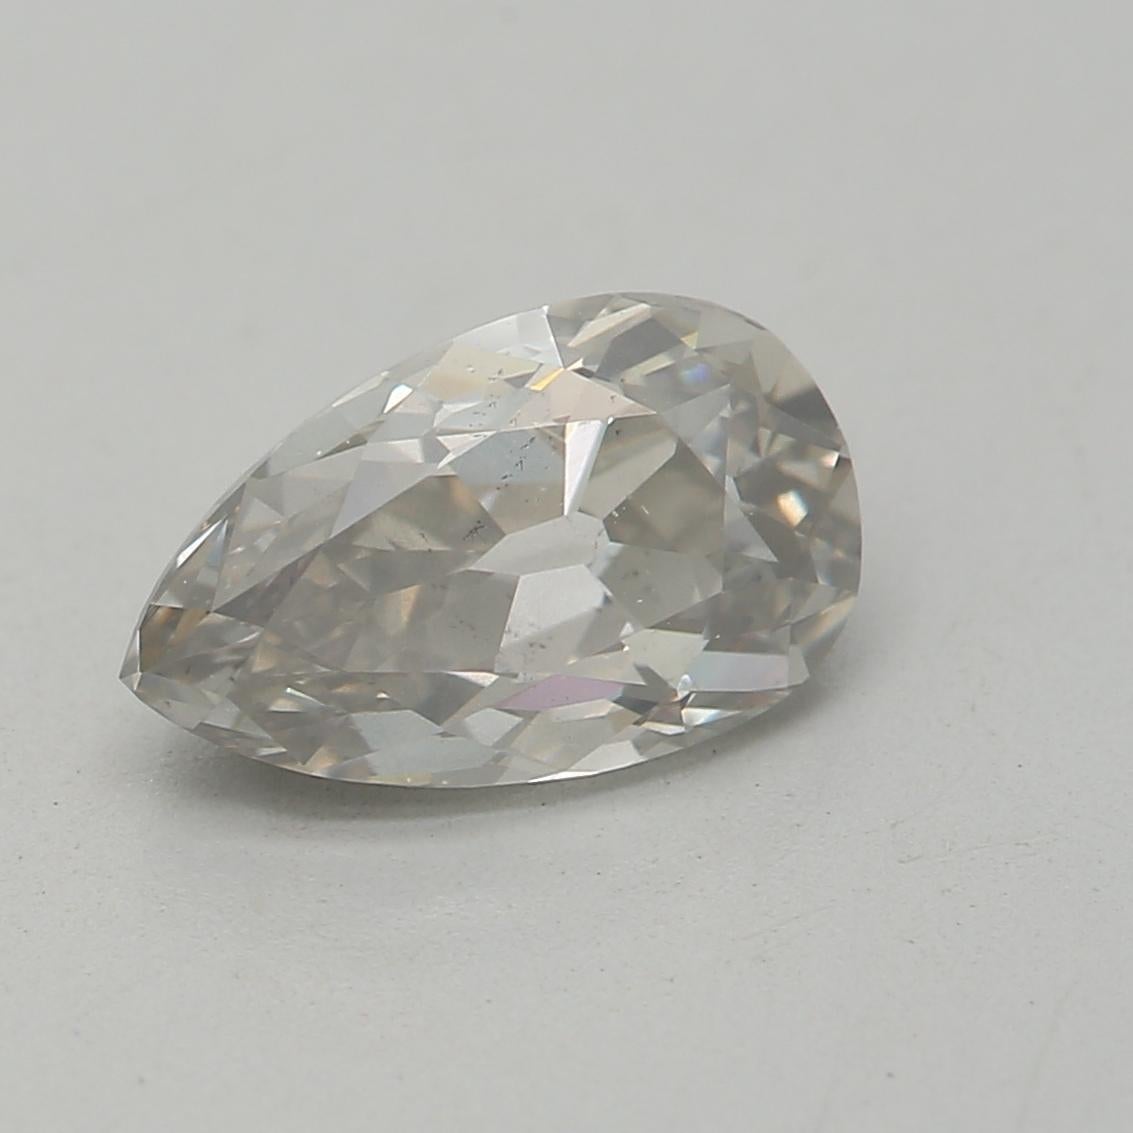 ***100% NATURAL FANCY COLOUR DIAMOND***

✪ Diamond Details ✪

➛ Shape: Pear
➛ Colour Grade: Fancy Light Gray
➛ Carat: 0.92
➛ Clarity: SI2
➛ GIA Certified 

^FEATURES OF THE DIAMOND^

This 0.92-carat diamond falls within the range of small to